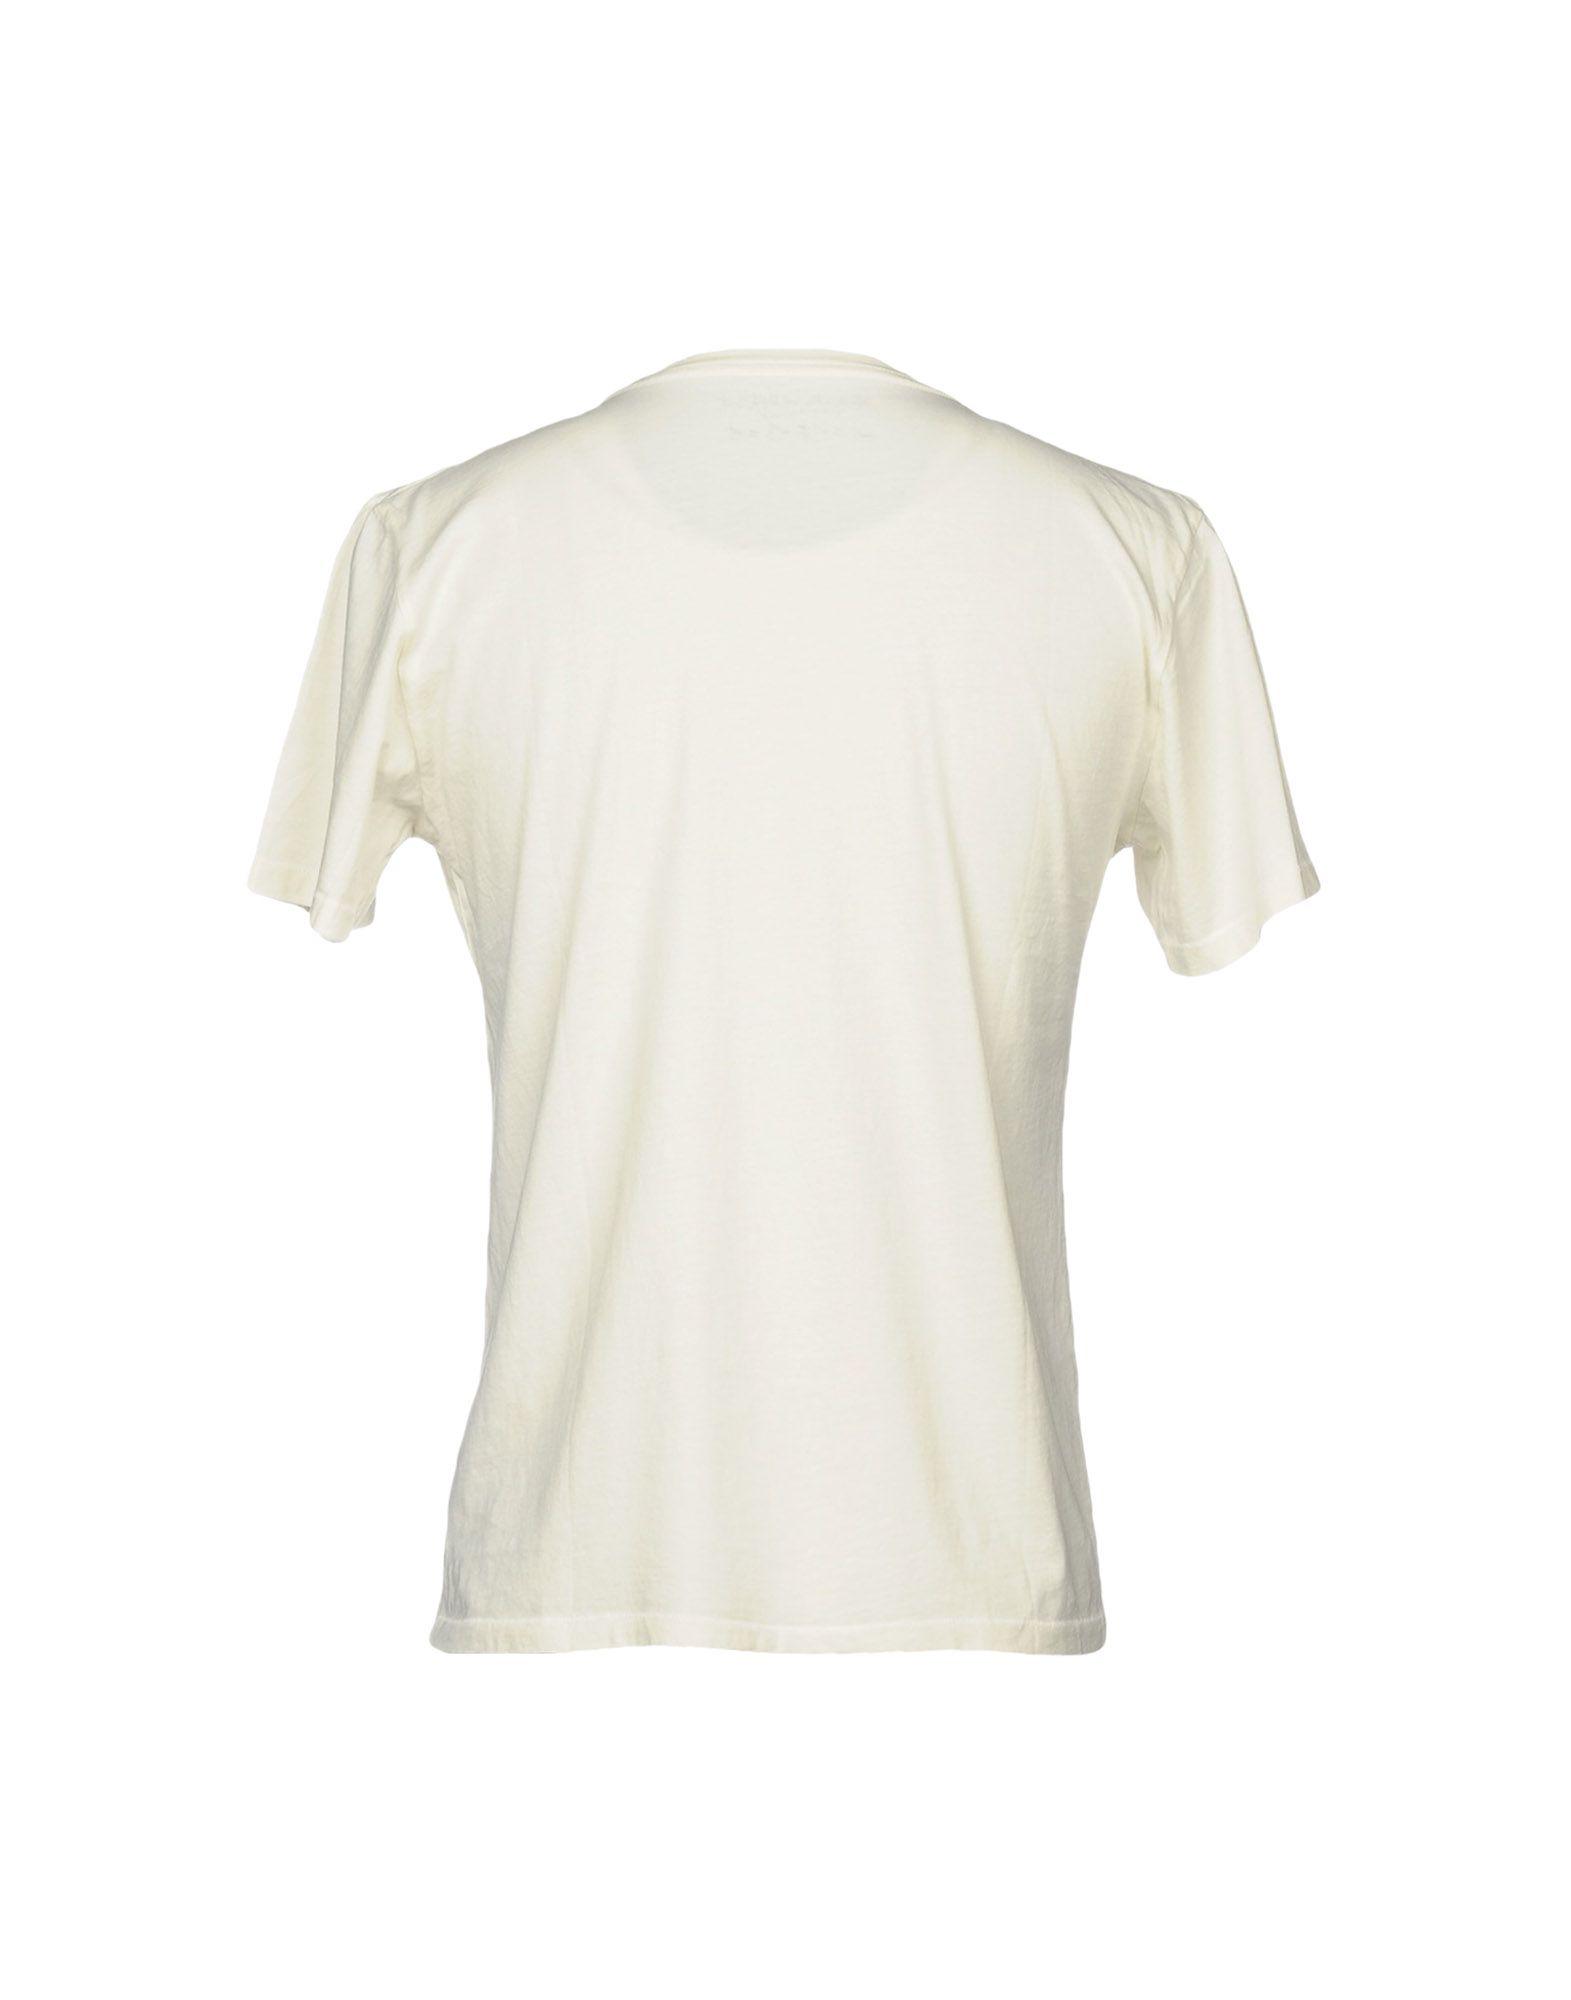 Blood Is The New Black Cotton T-shirt in Ivory (White) for Men - Lyst